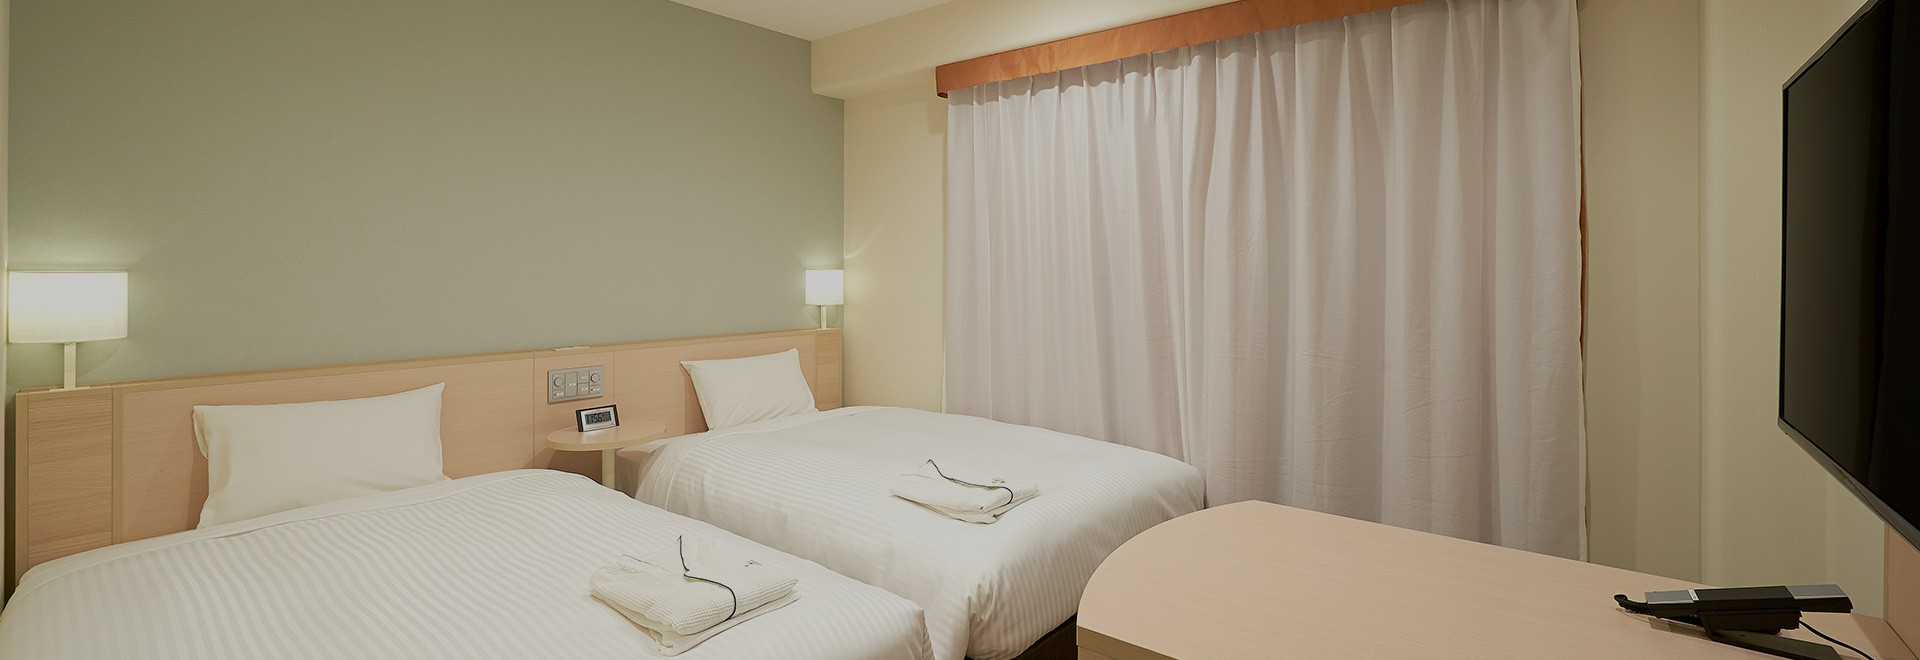 Have a pleasant stay in a relaxing atmosphere.